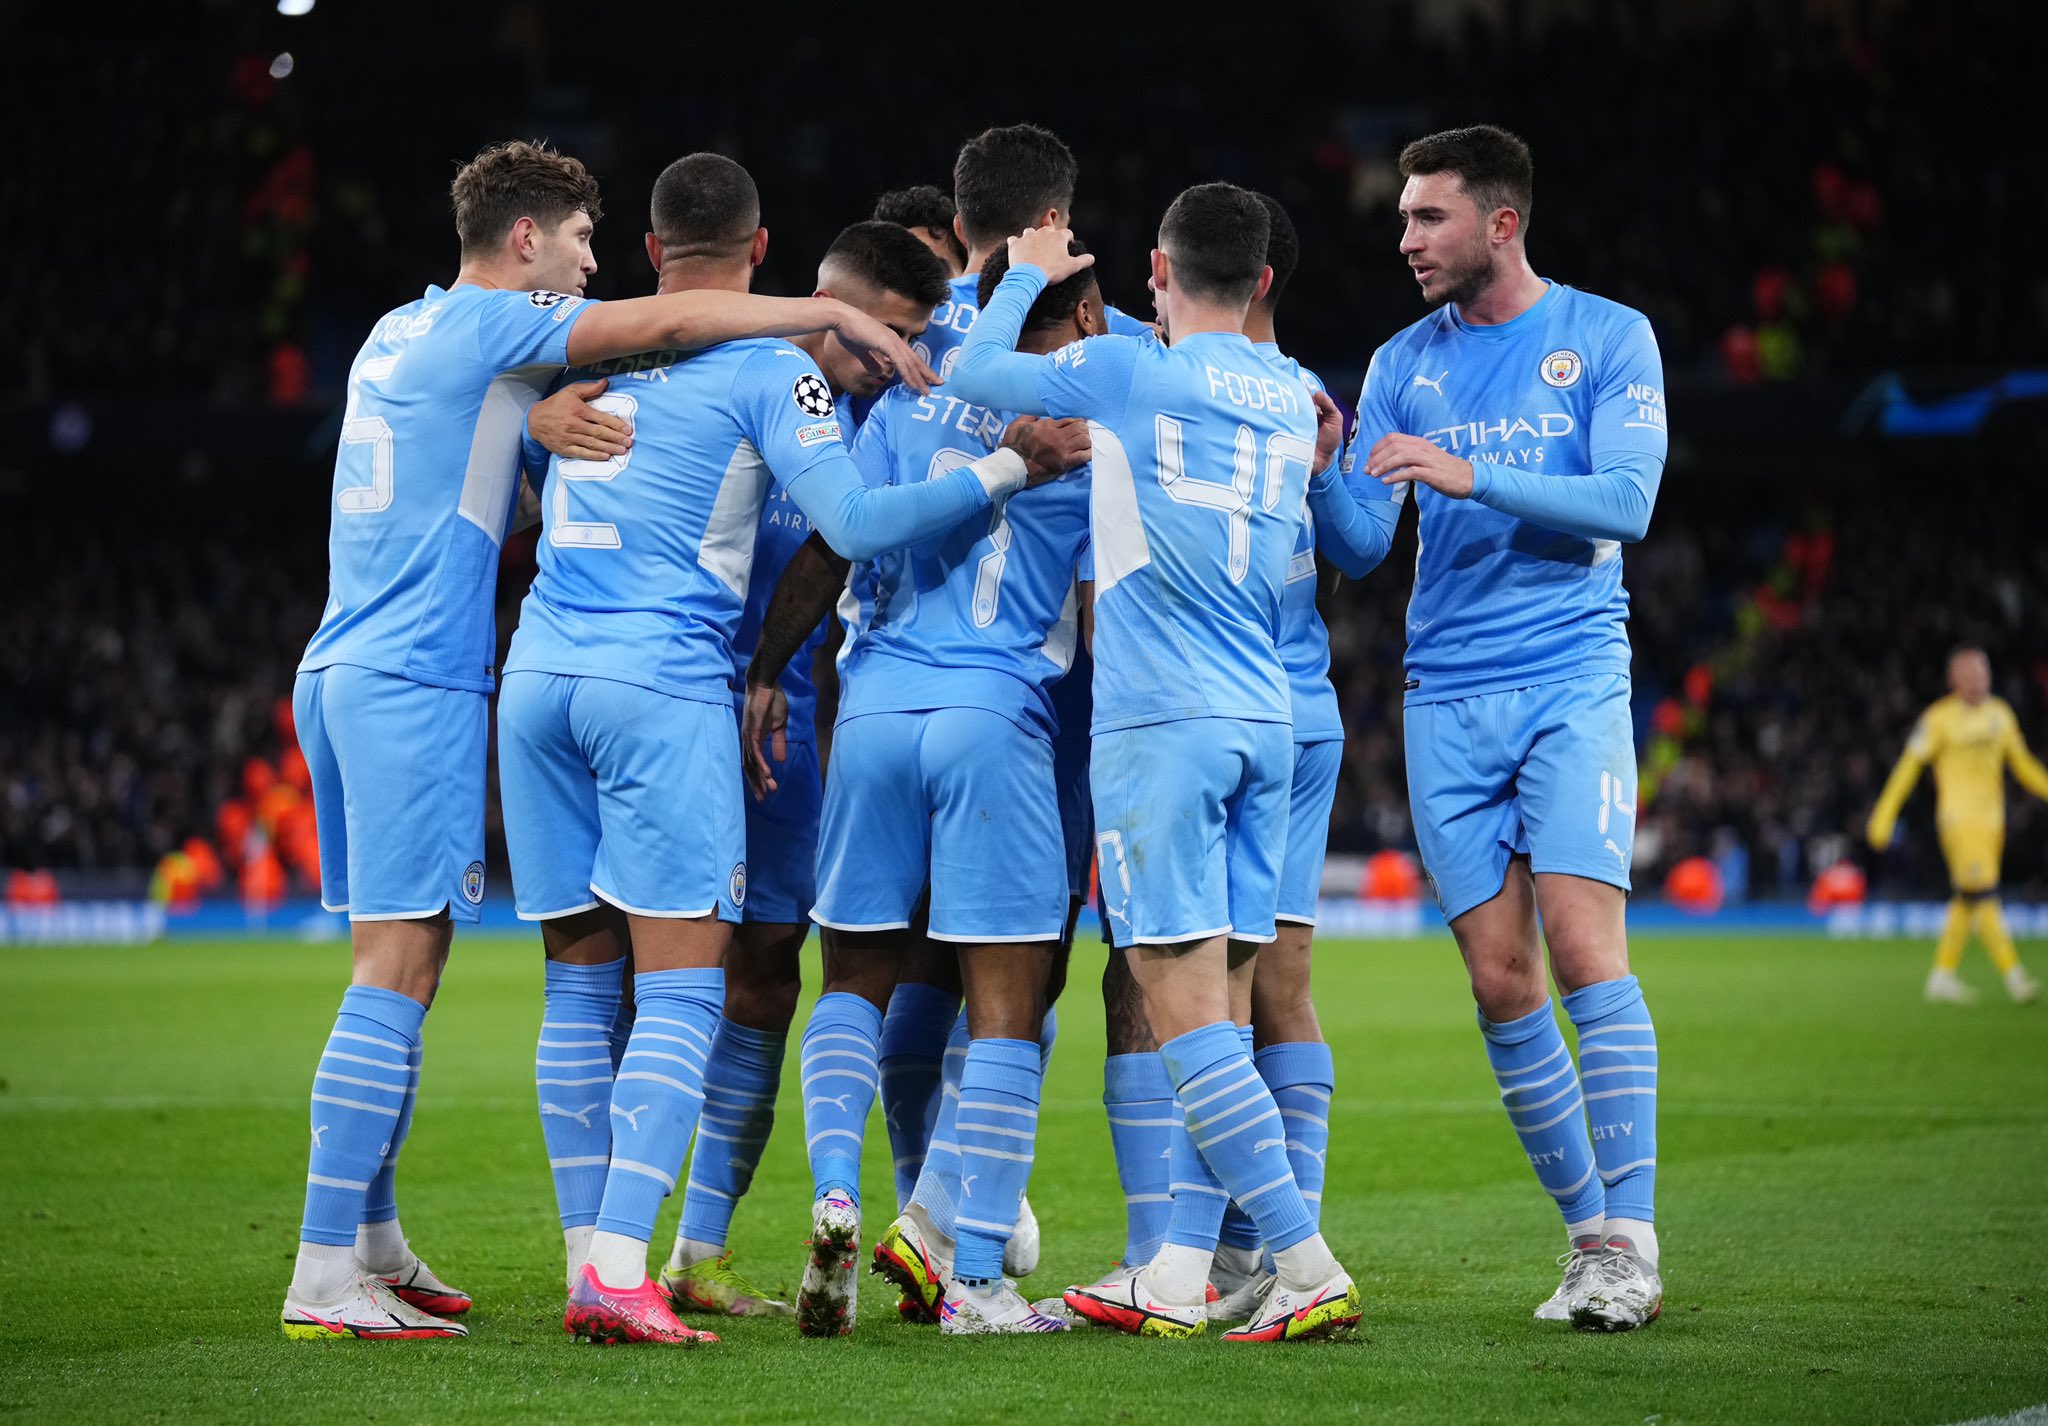 UEFA Champions League: Manchester City thrashed Club Brugge 4-1